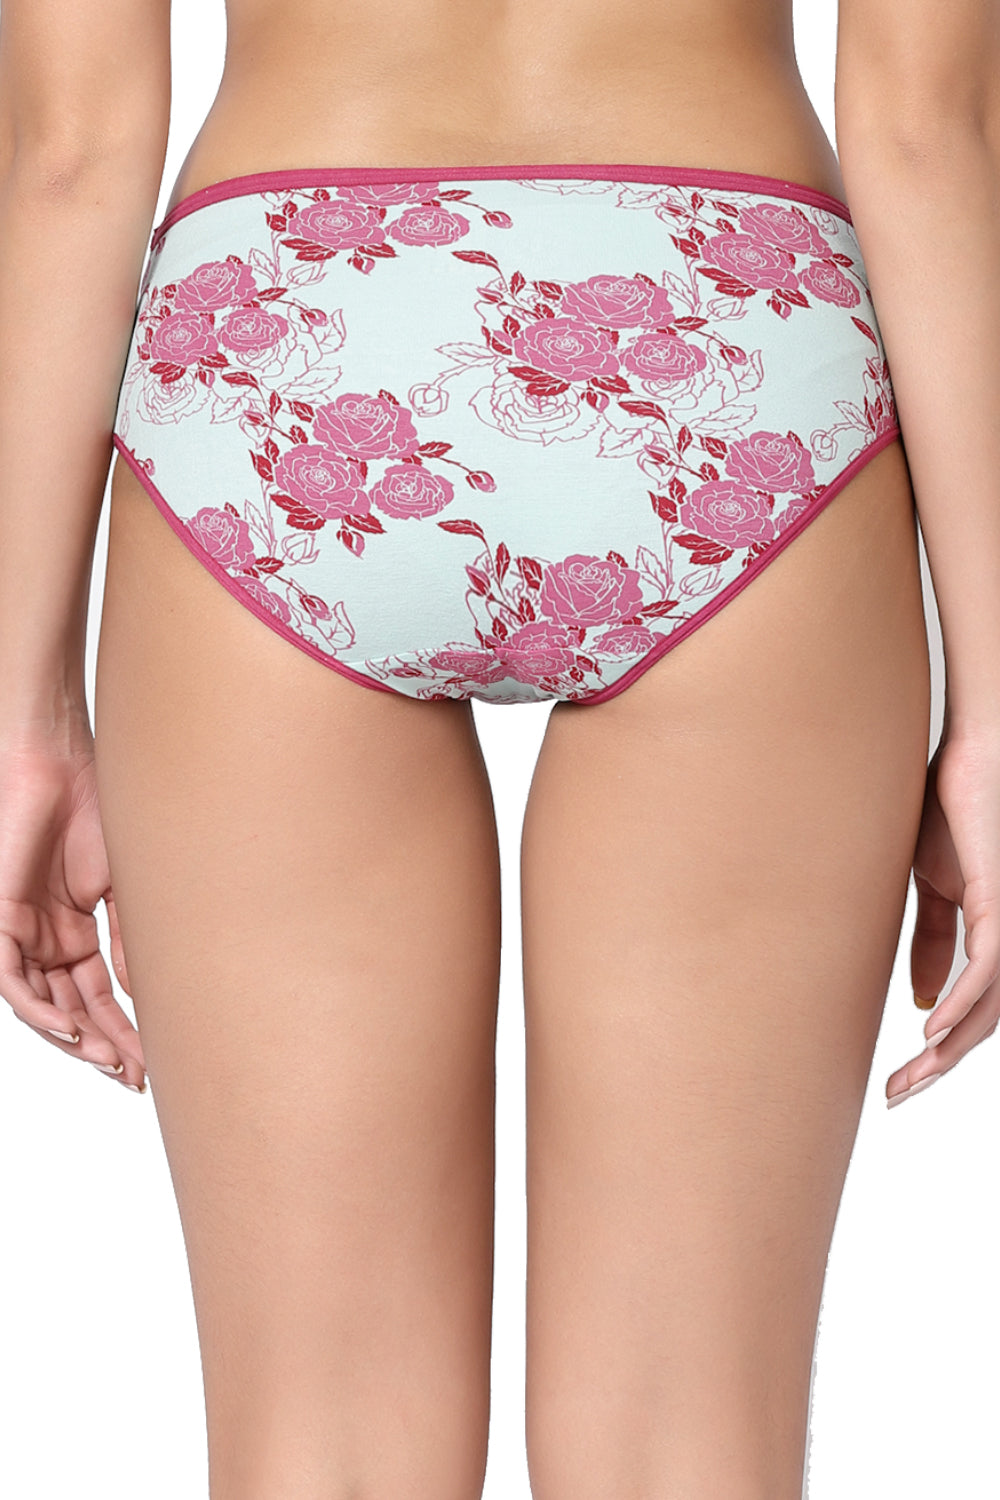 Organic Cotton Antimicrobial Maternity Panty-IMP102-Pink Floral Print_Pink Floral Print-